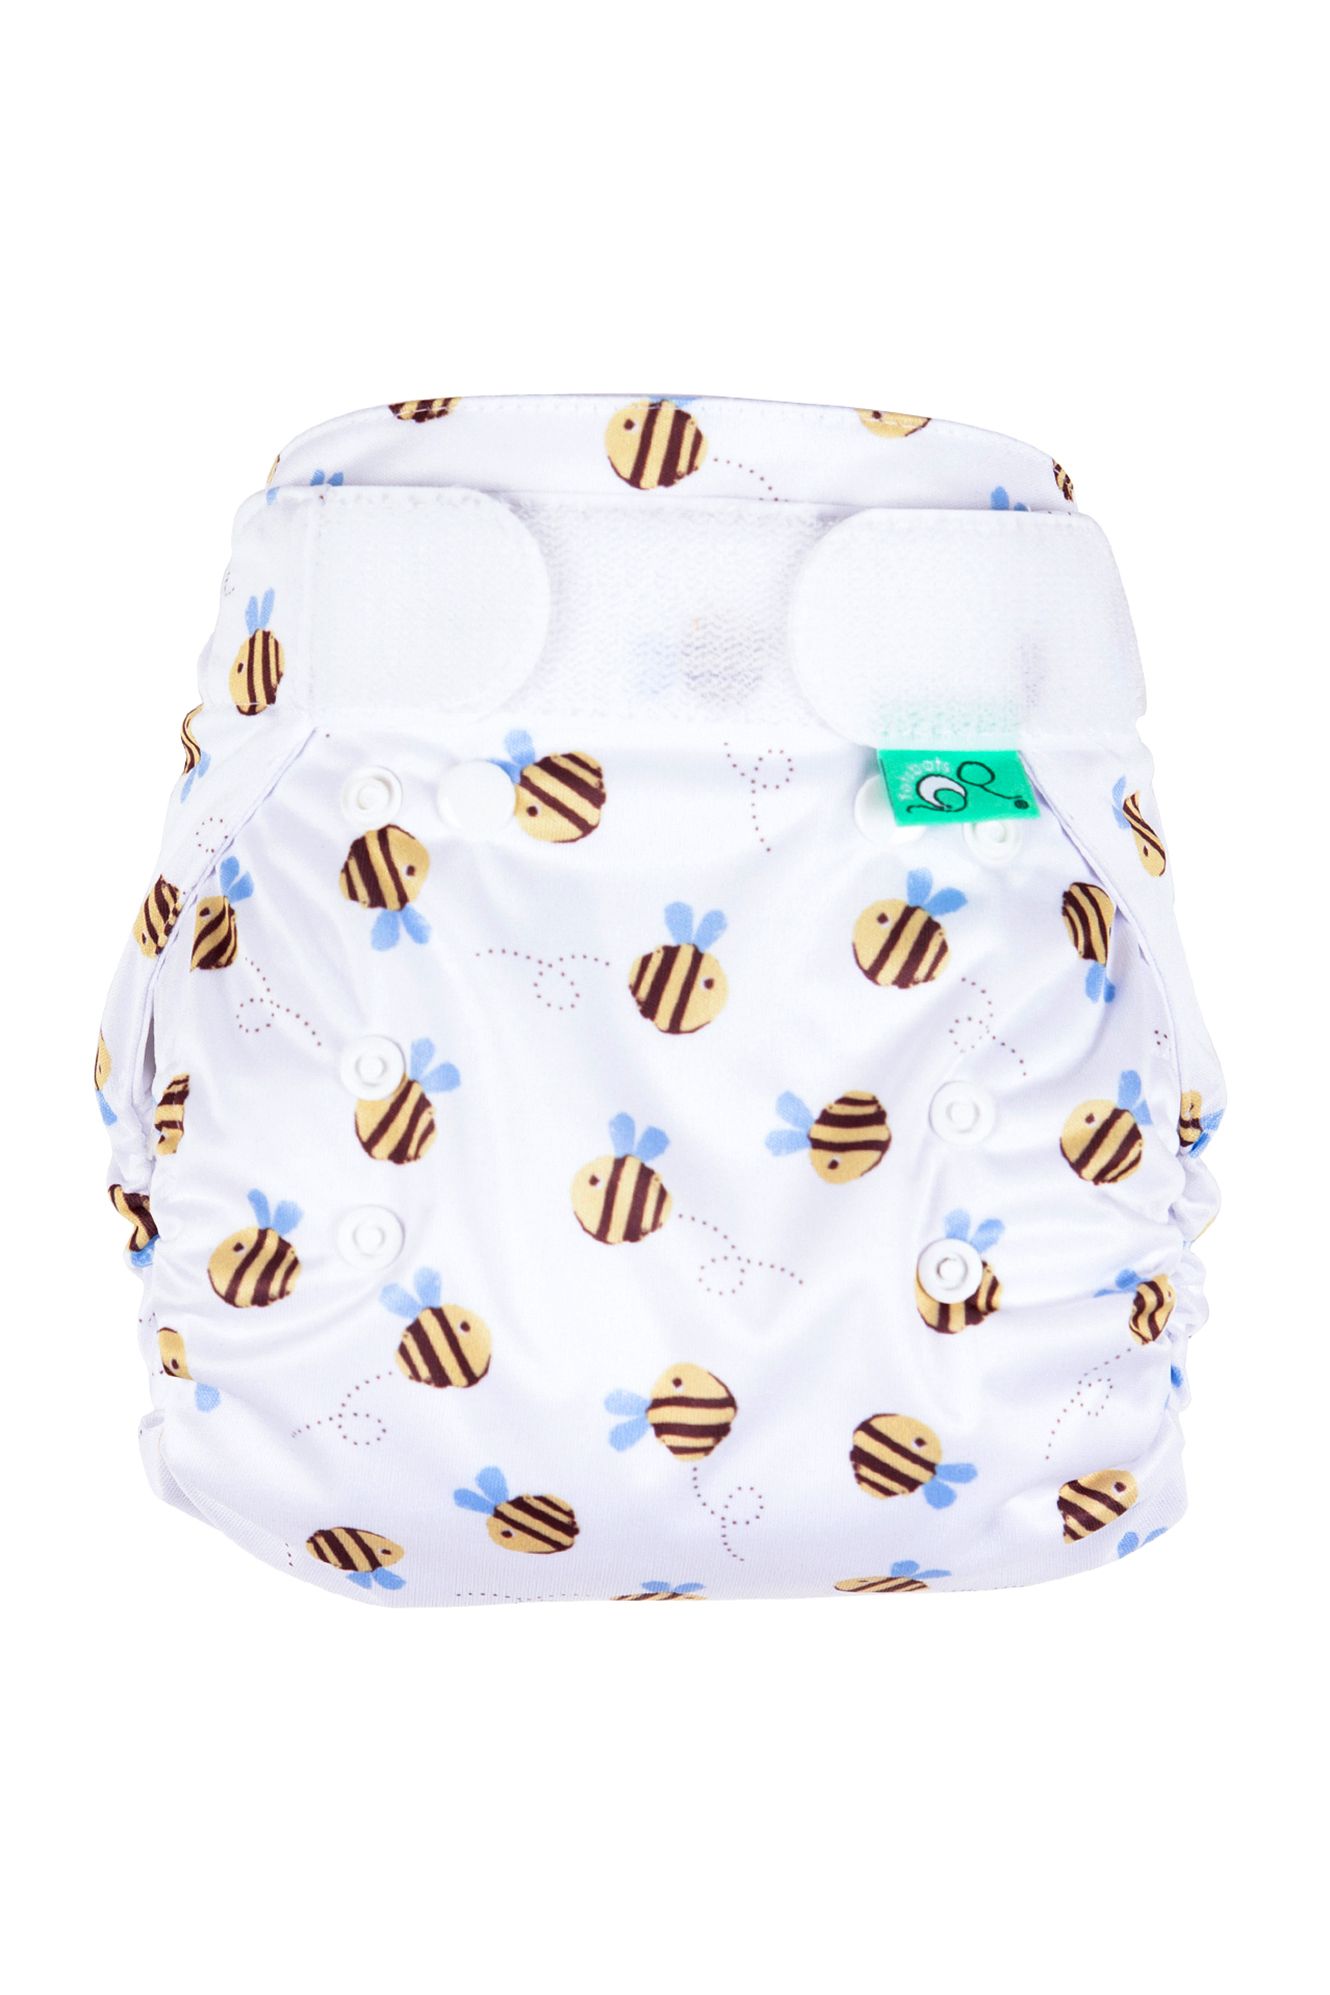 TotsBots All-in-one Reusable Nappy